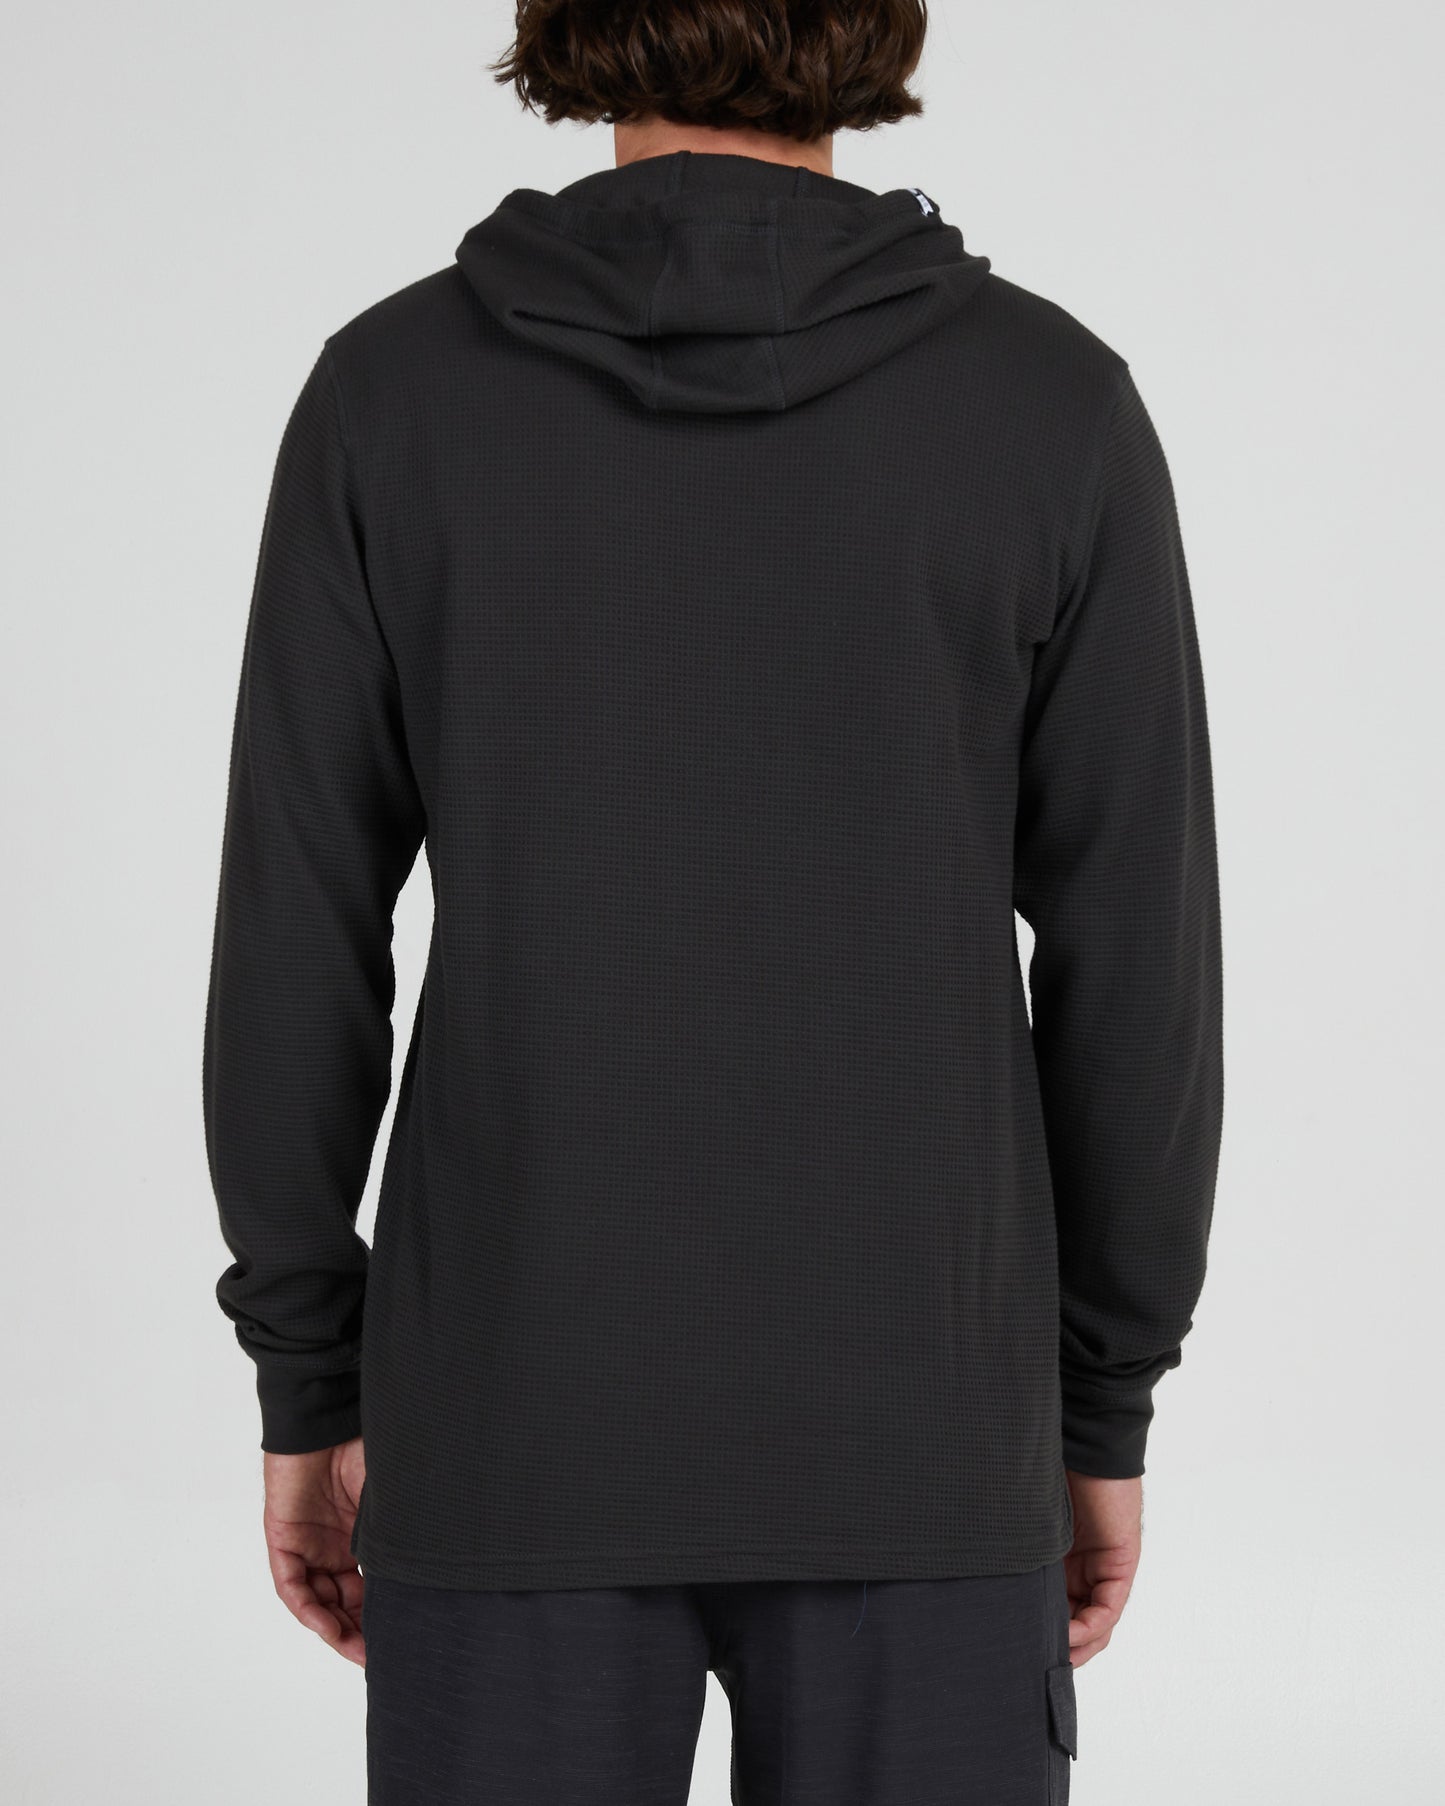 On body back of the Daybreak 2 Faded Black Hooded Thermal